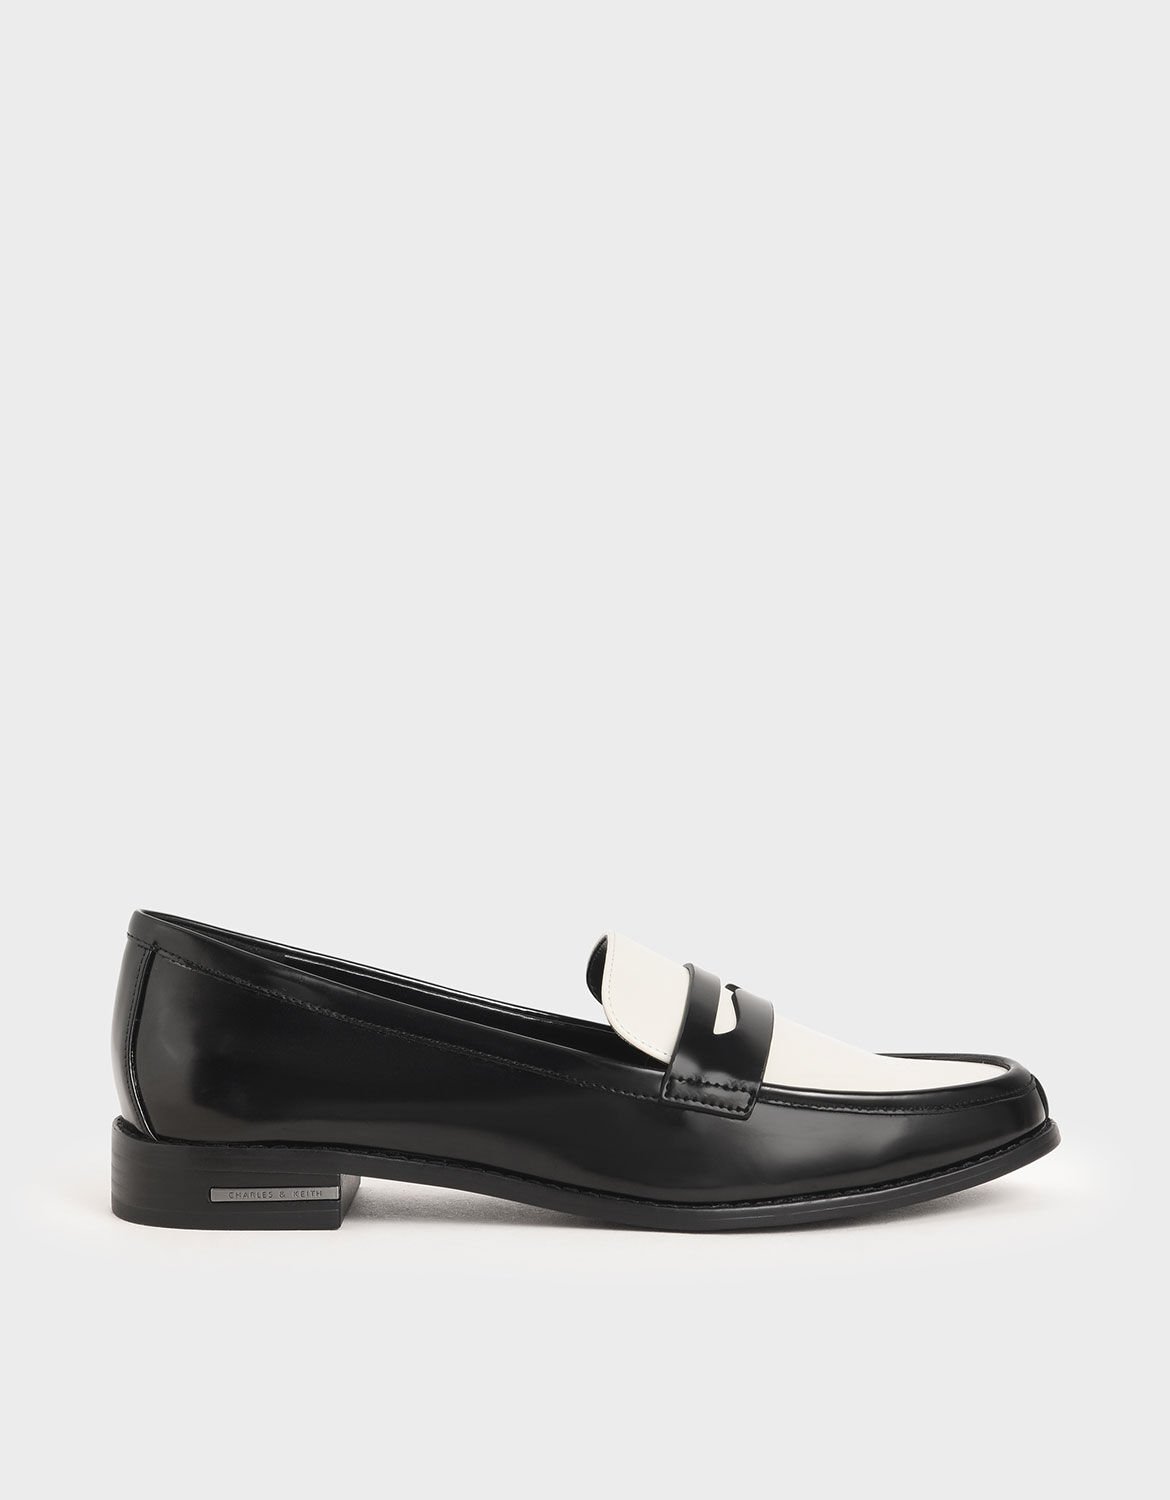 Black Penny-Loafers | CHARLES \u0026 KEITH KW